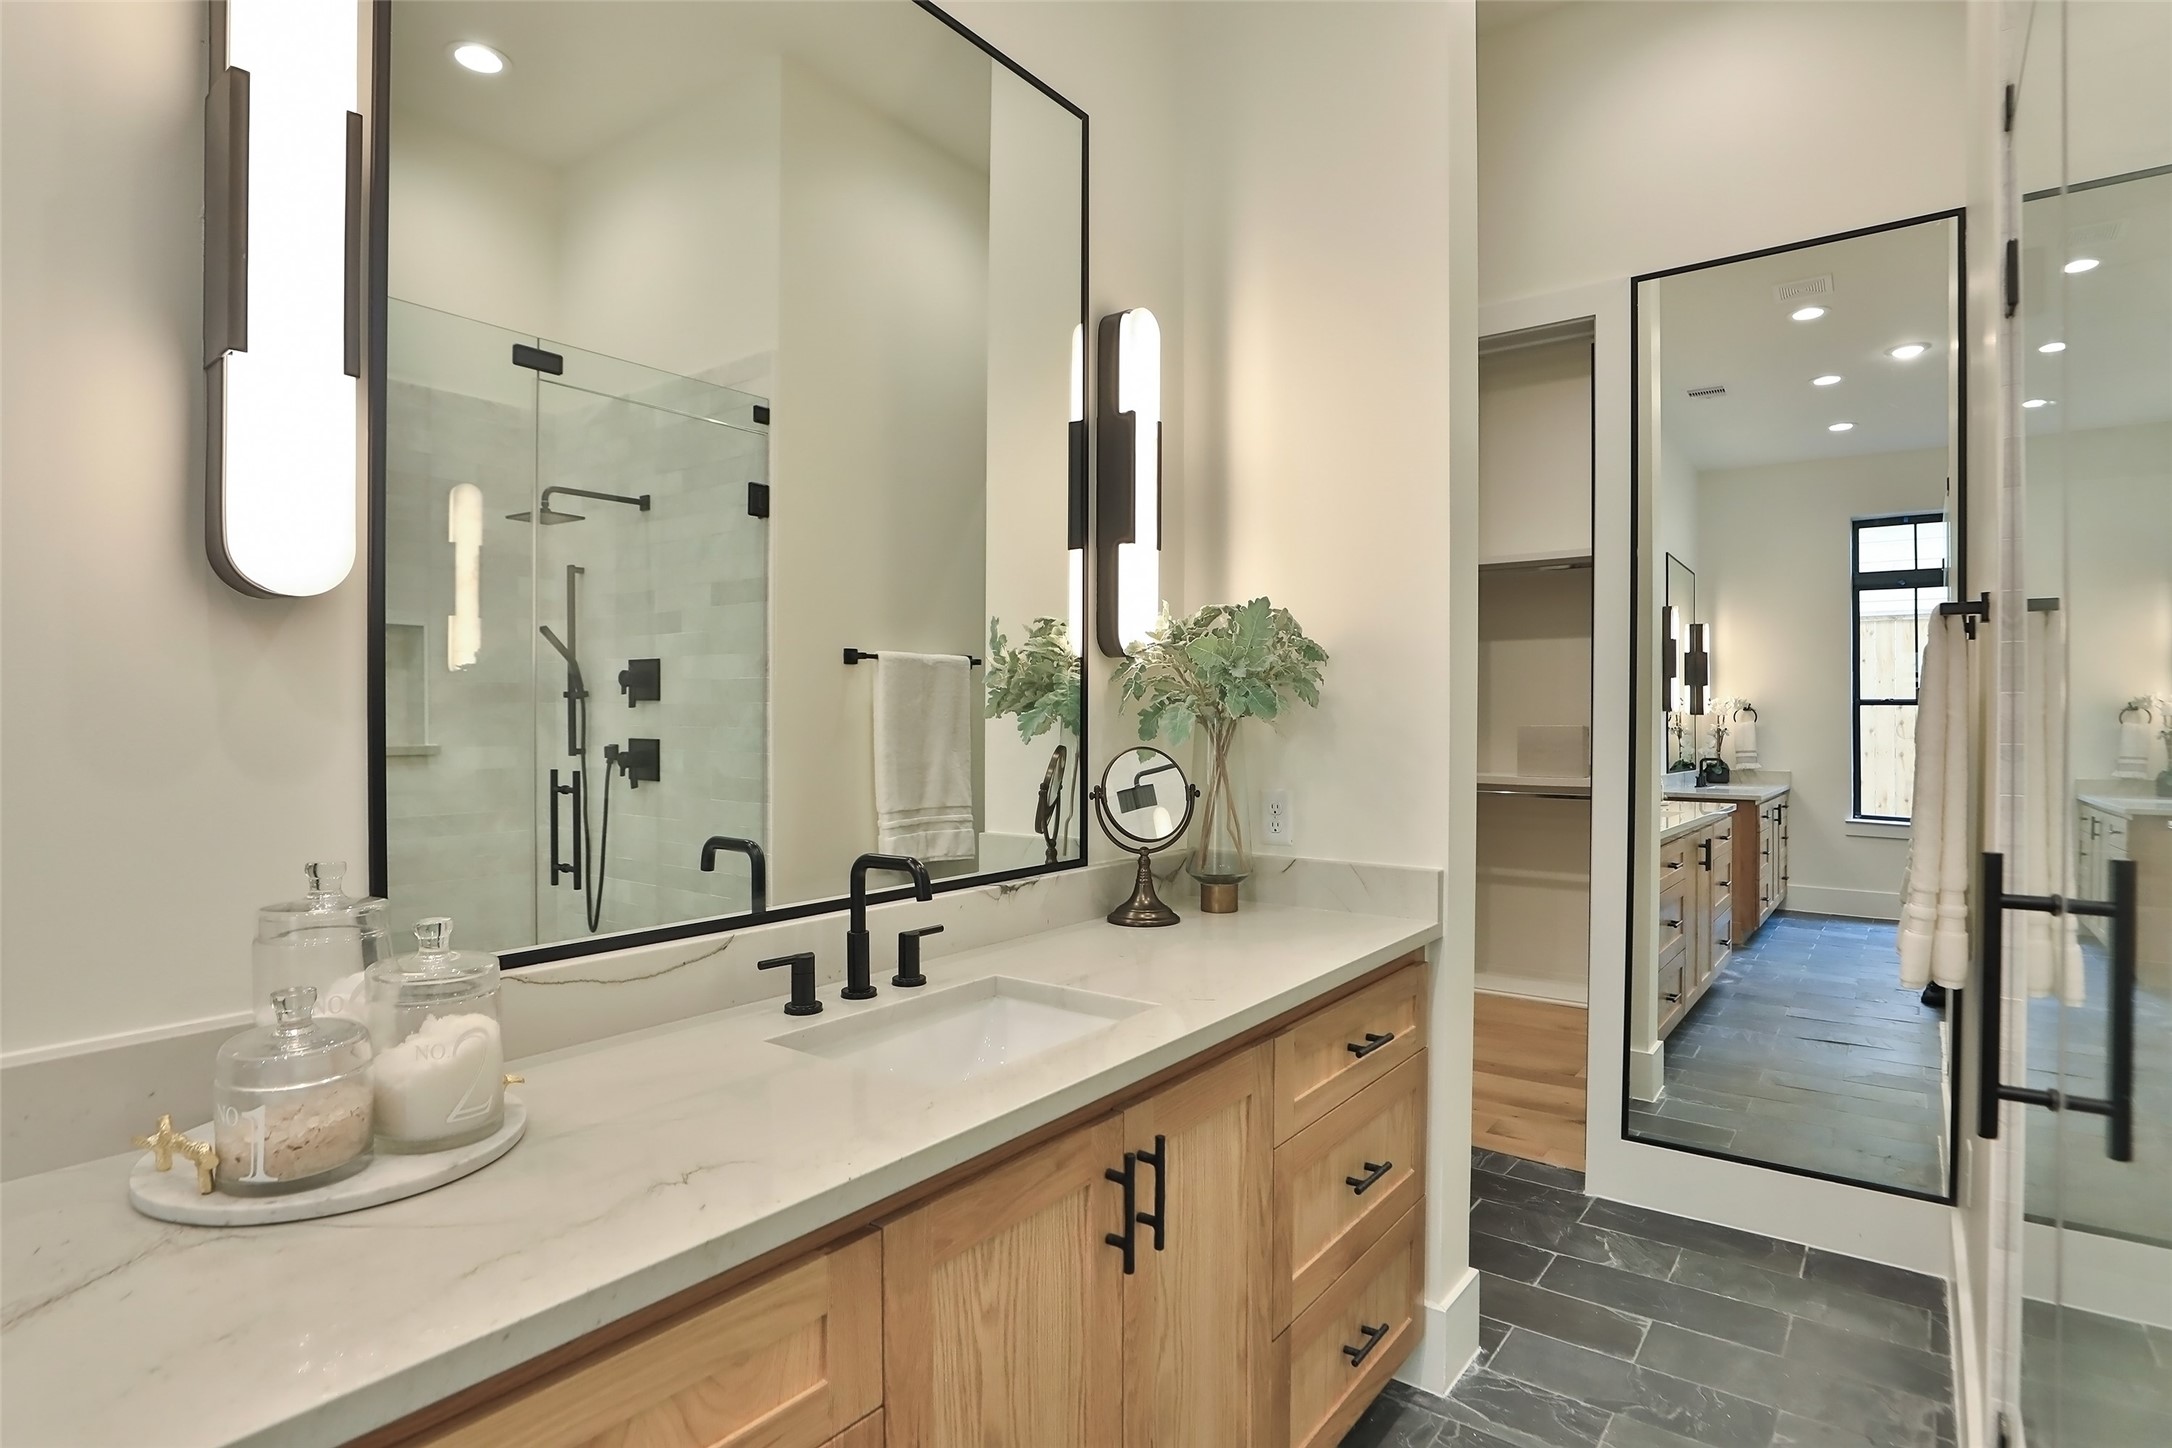 The primary bath has a huge walk in shower and separate soaker tub with flagstone tile floors and large full length mirror.